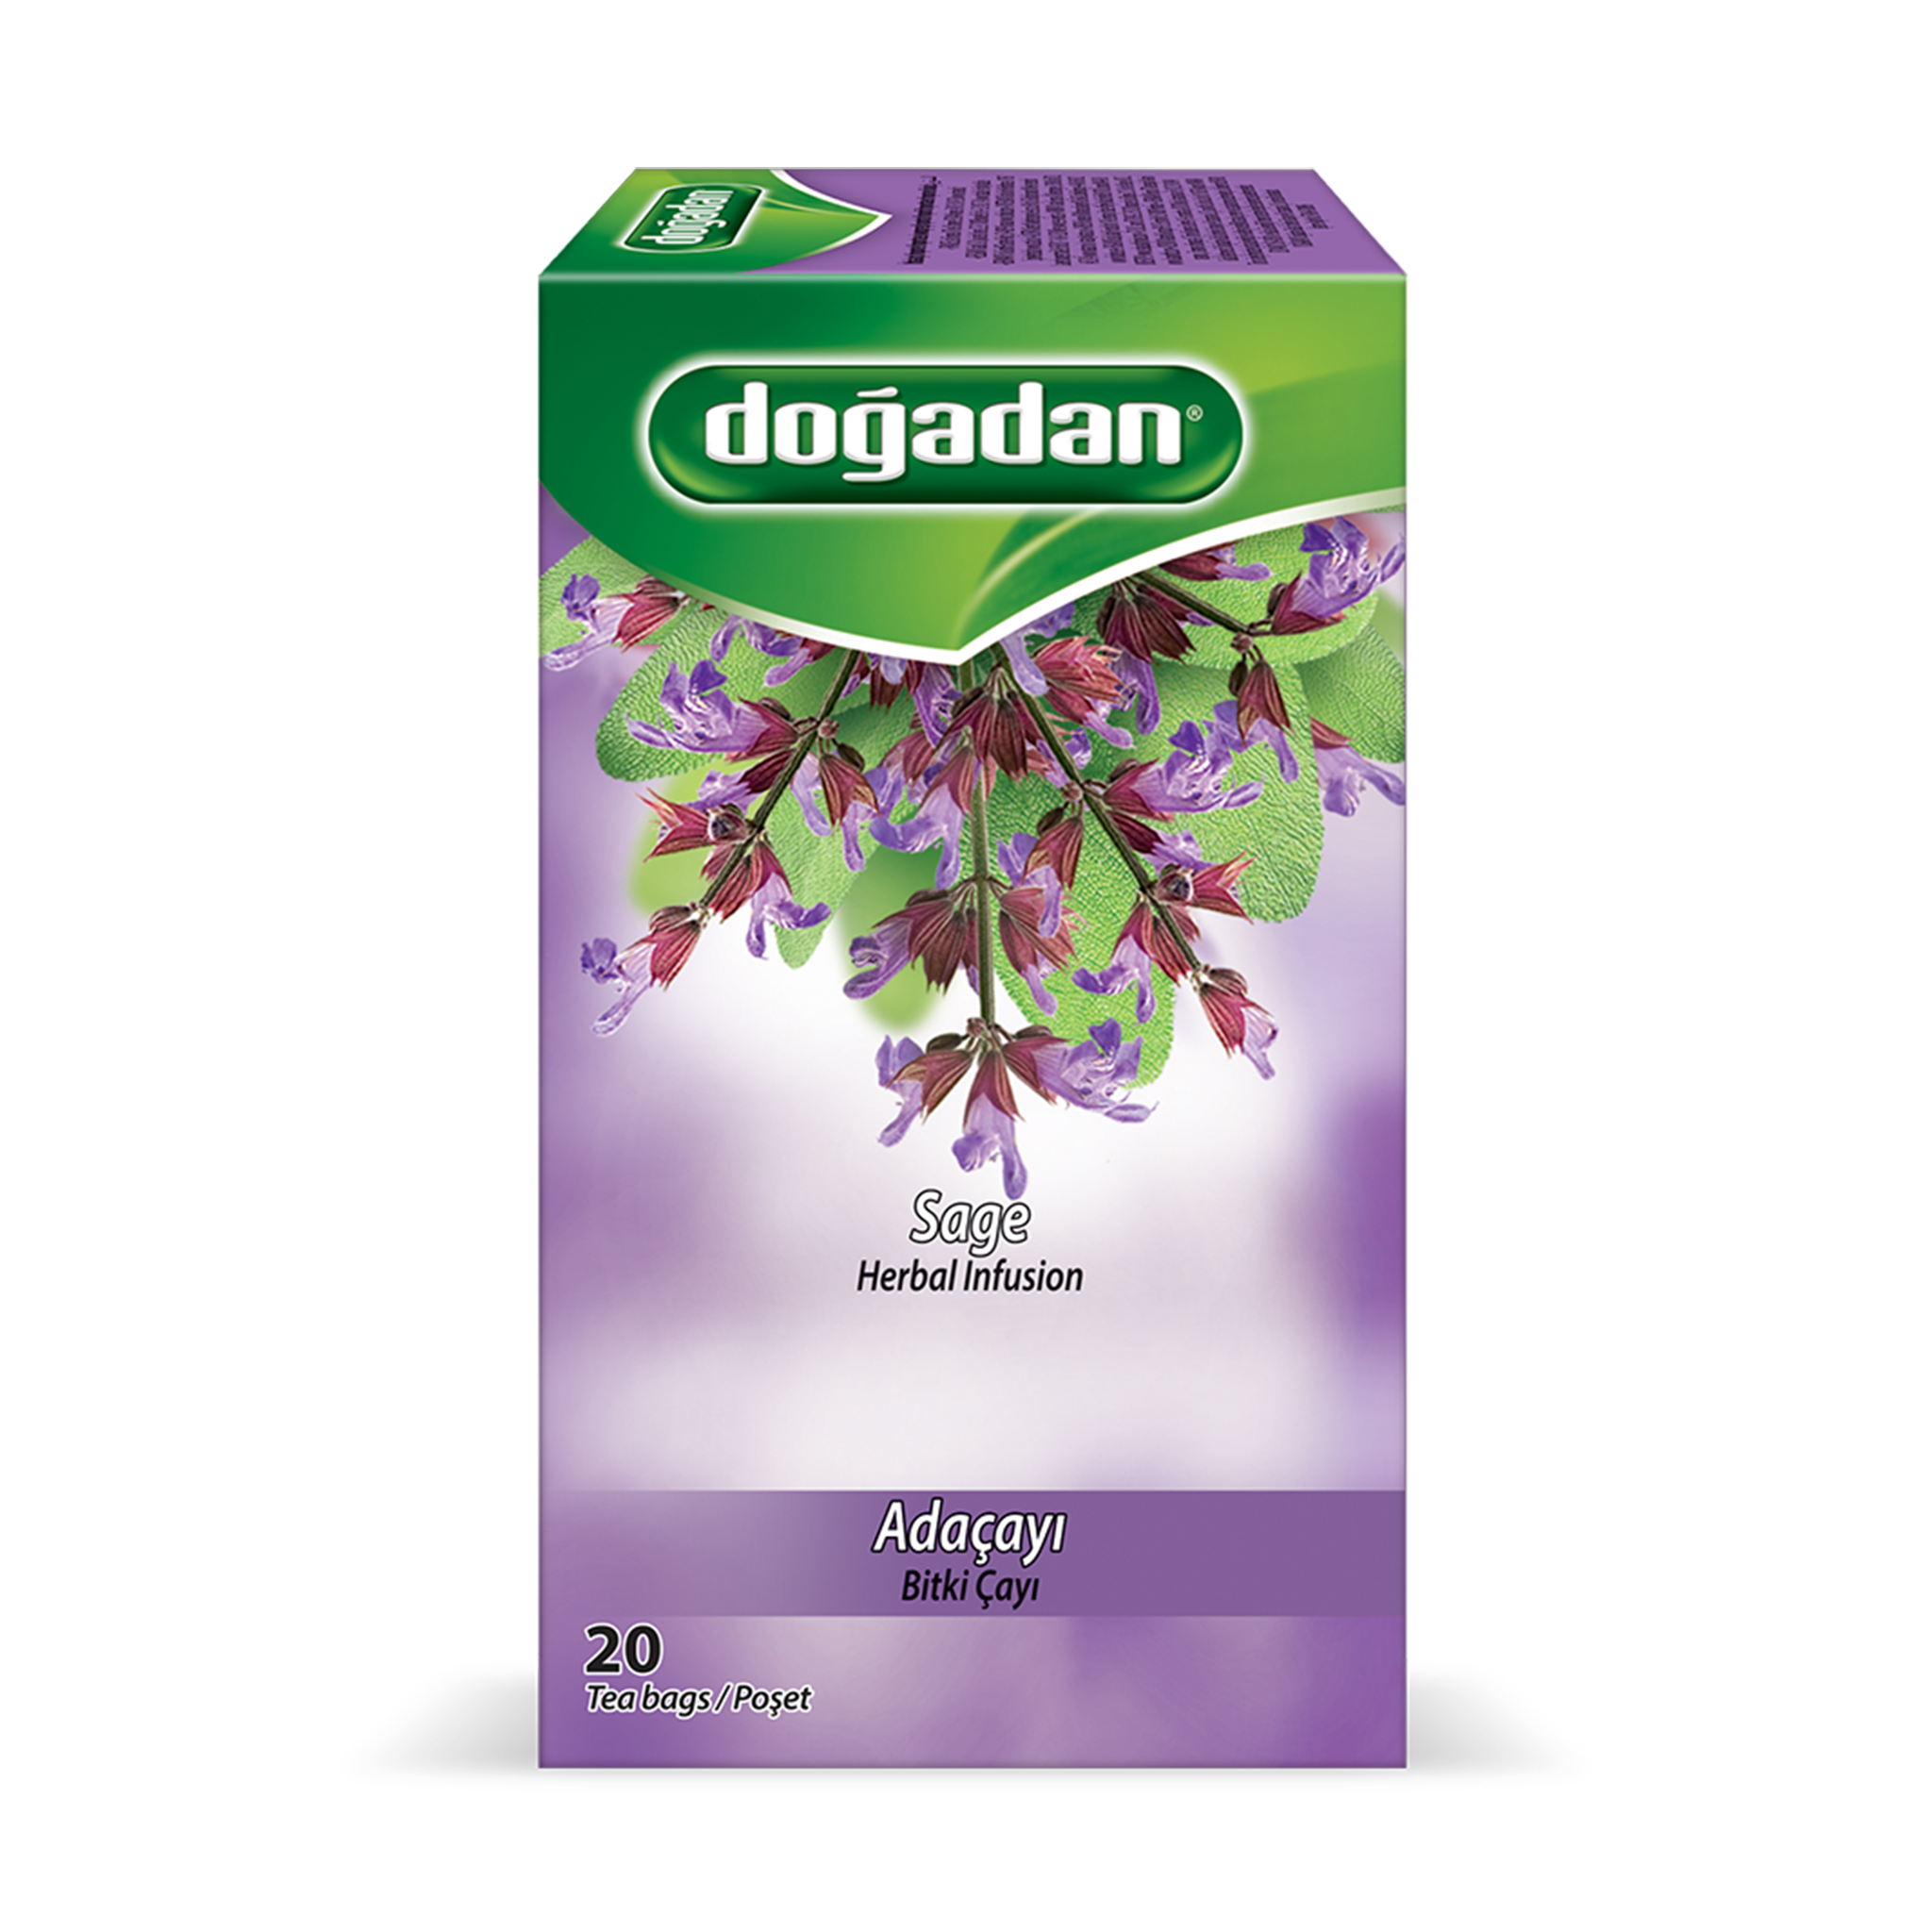 [Free Shipping] Dogal Support Package No.2: Dogadan 6 types of herbal teas + Earl Gray tea